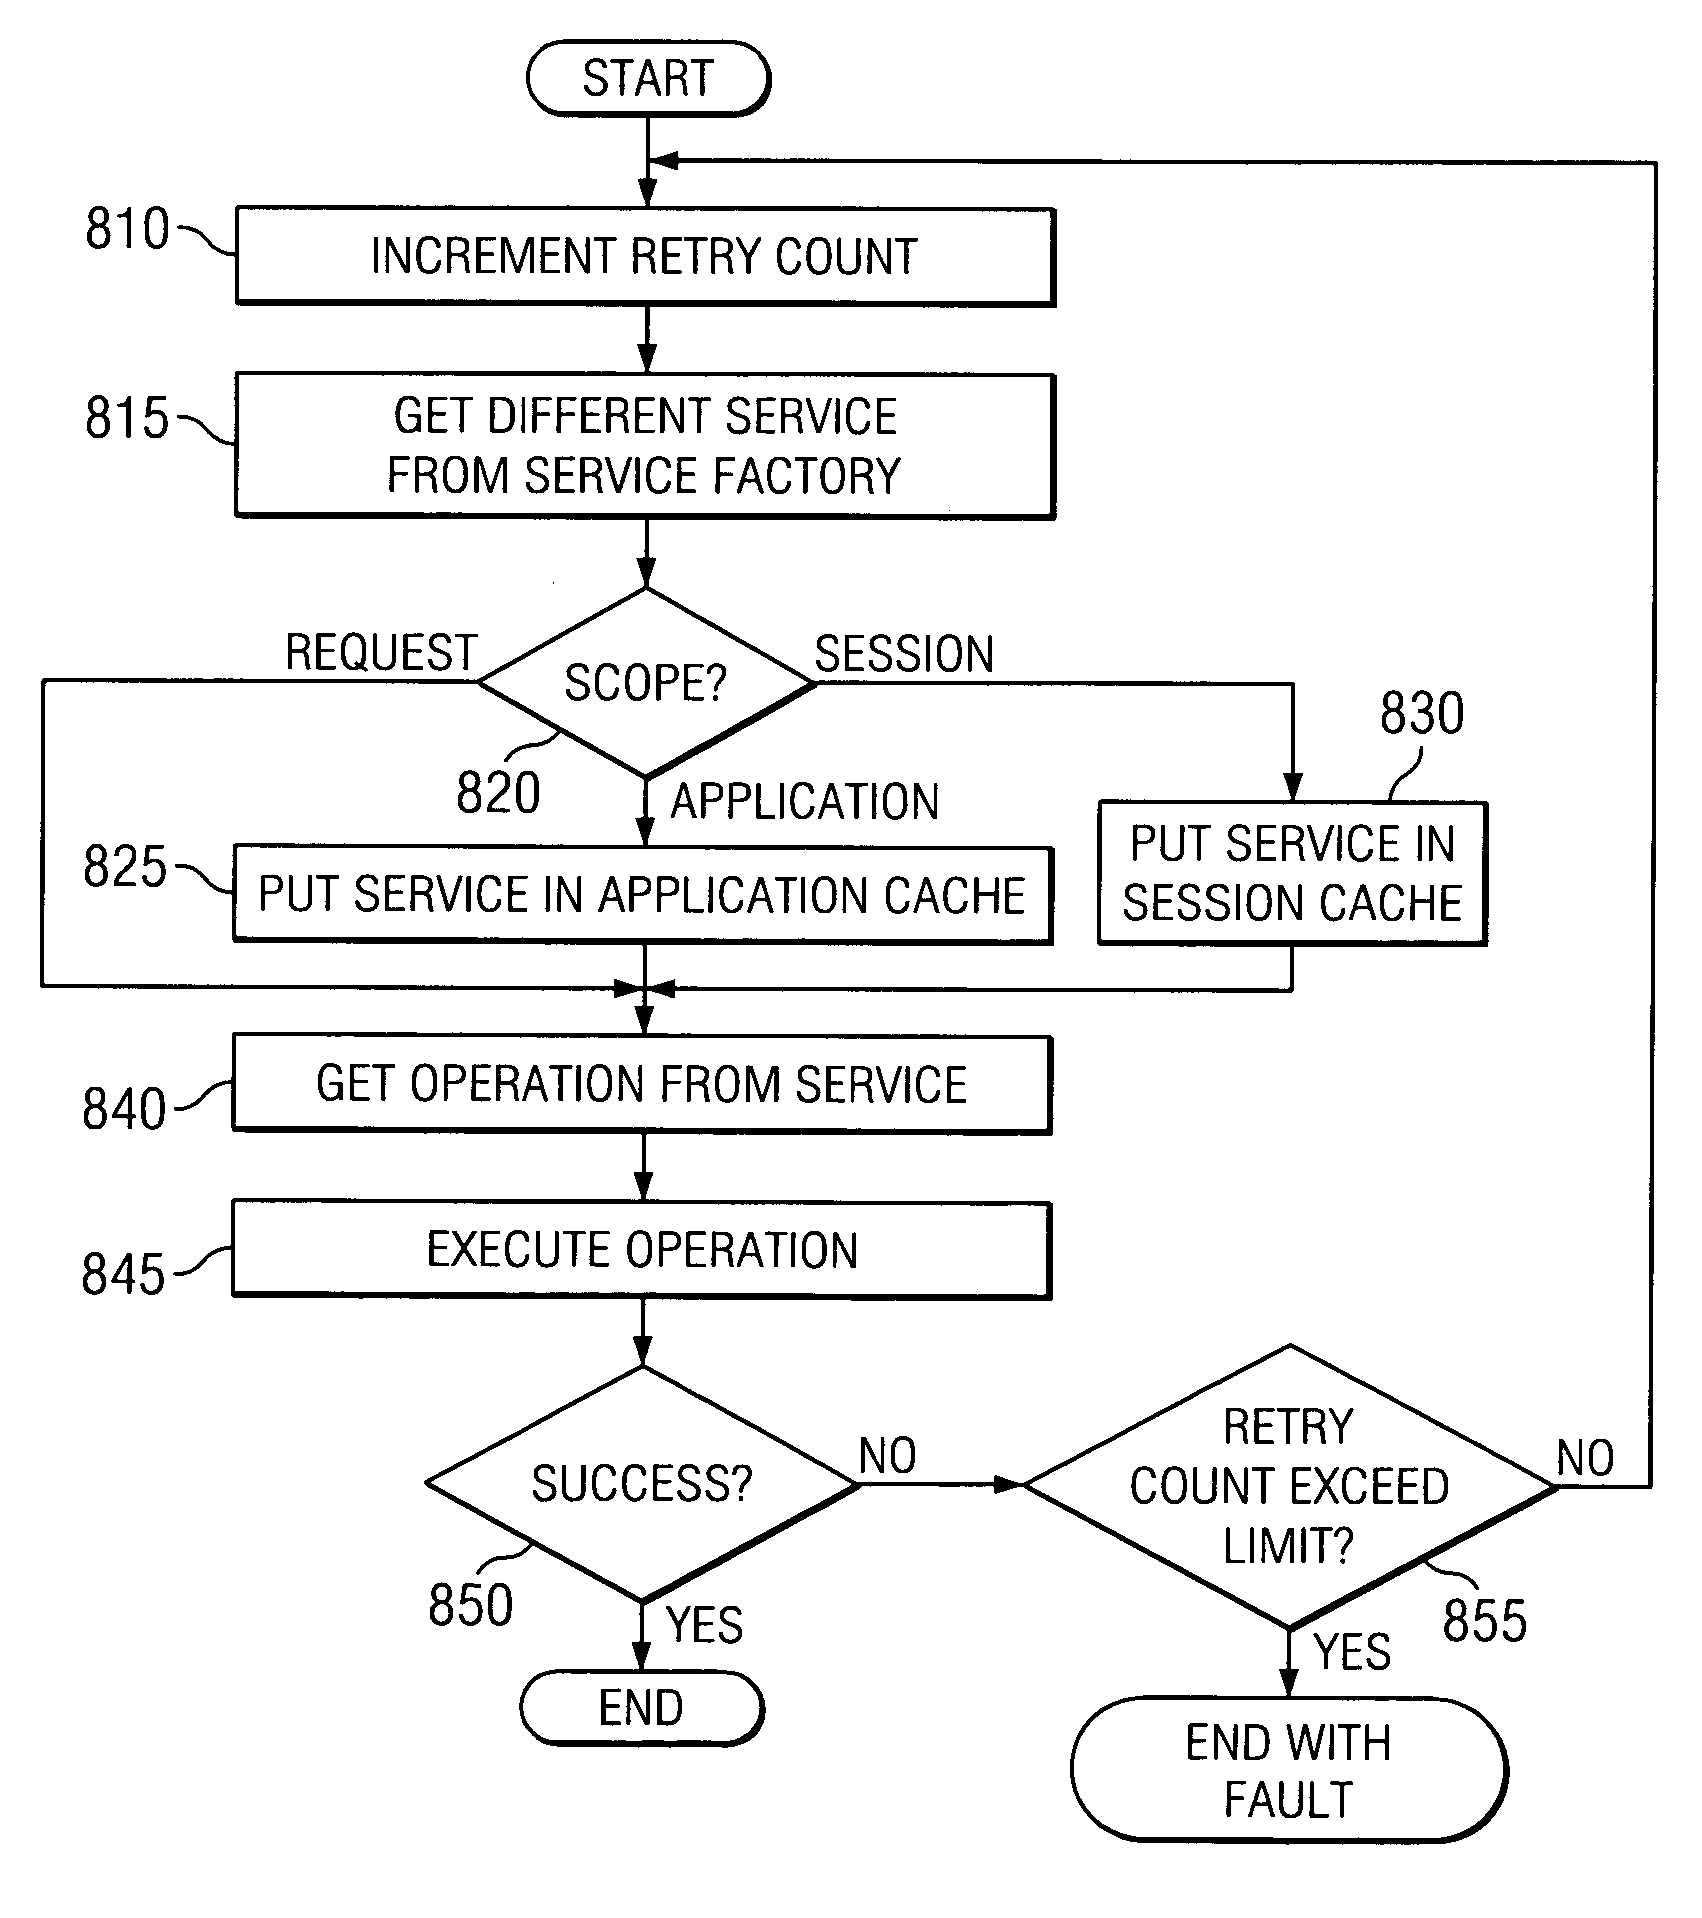 Apparatus and method for selecting a web service in response to a request from a client device